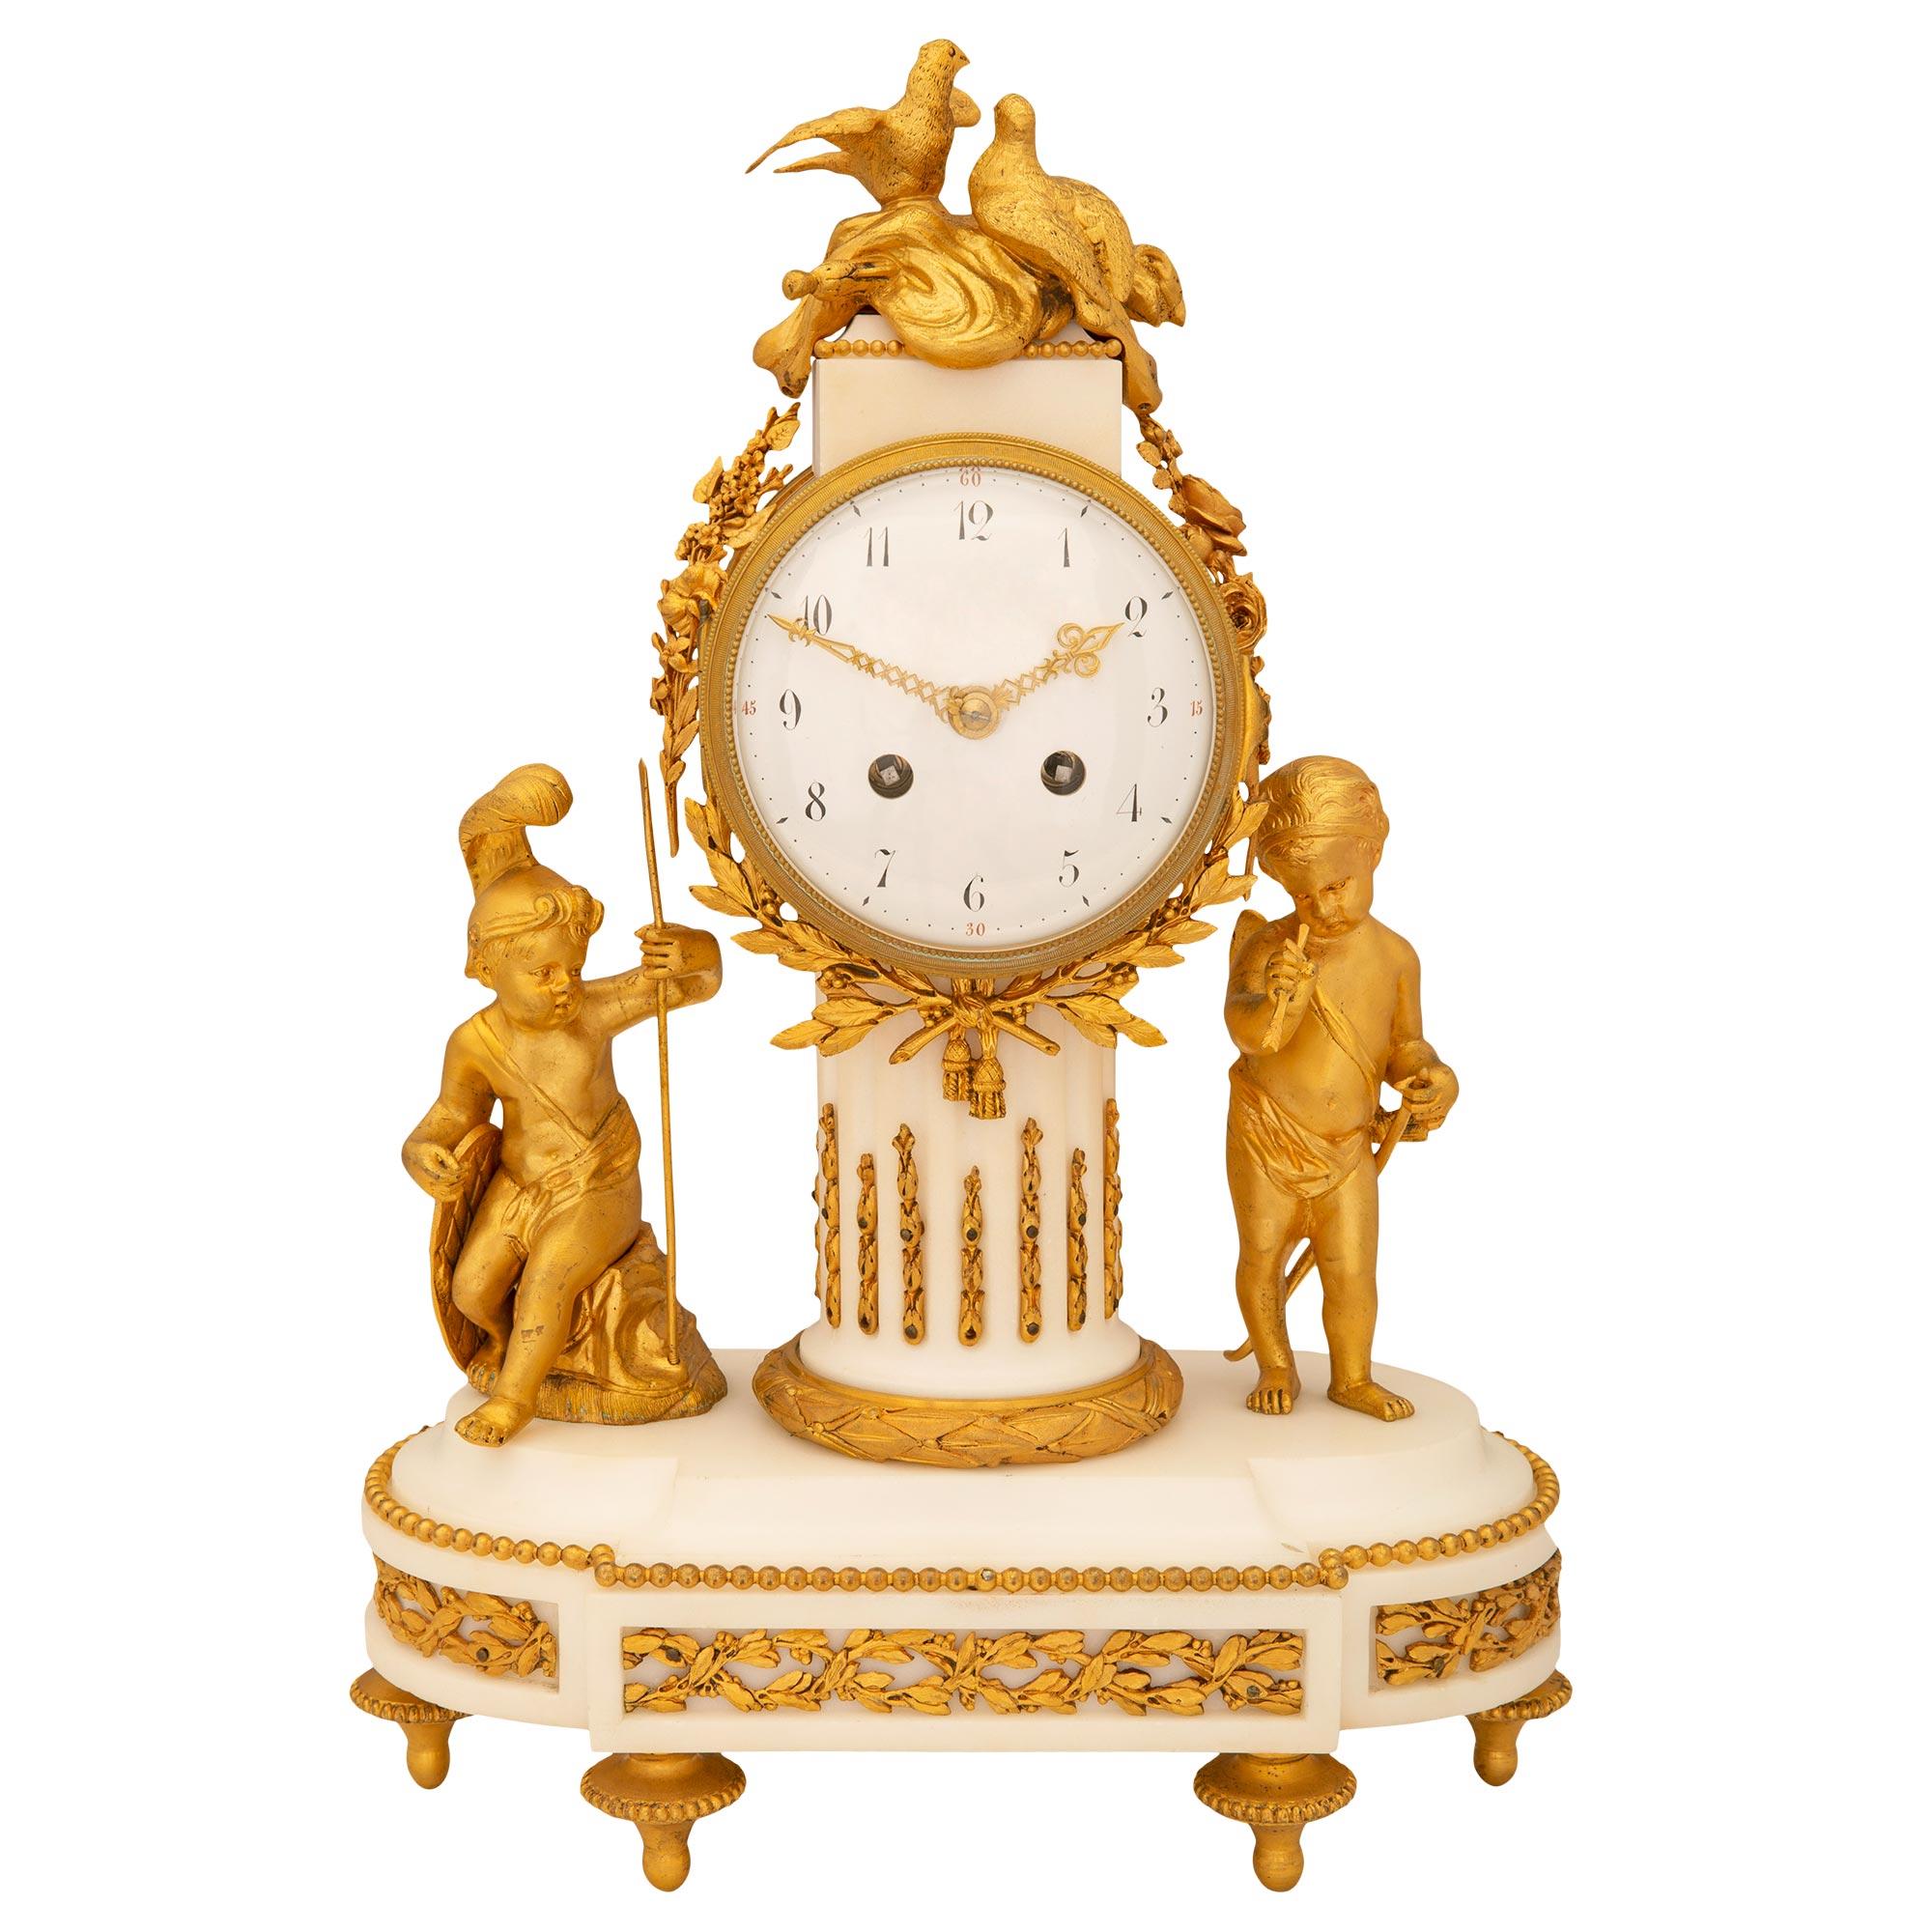 An exquisite French 19th century Louis XVI st. white Carrara marble and ormolu clock. The clock is raised by ormolu topie shaped supports below a marble base with ormolu scrolling foliage and ormolu beaded row. Above is the central fluted marble